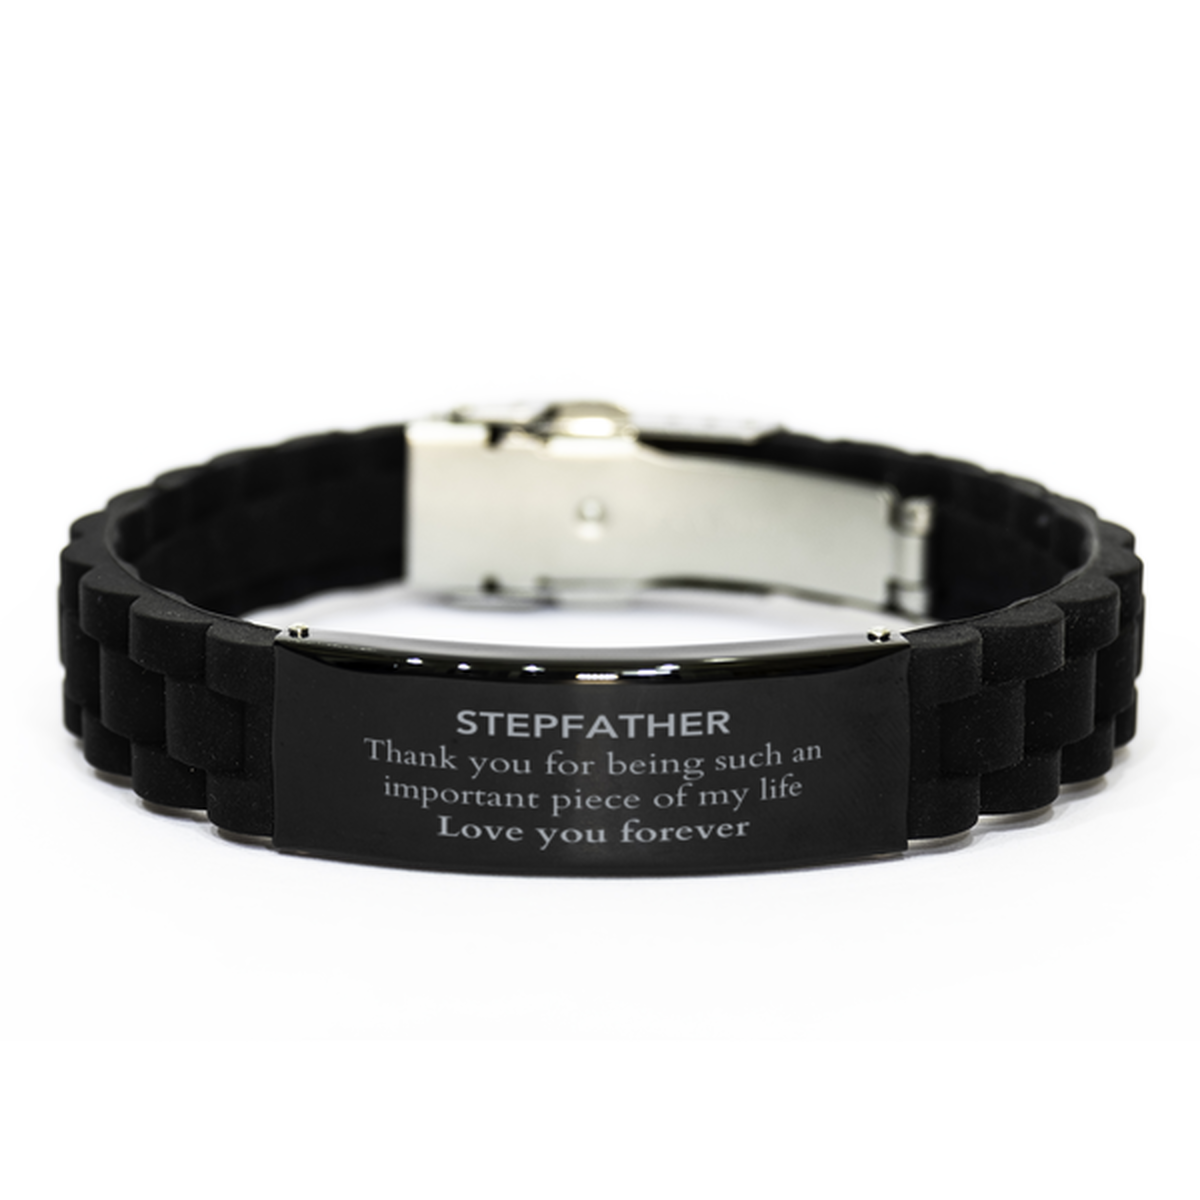 Appropriate Stepfather Black Glidelock Clasp Bracelet Epic Birthday Gifts for Stepfather Thank you for being such an important piece of my life Stepfather Christmas Mothers Fathers Day